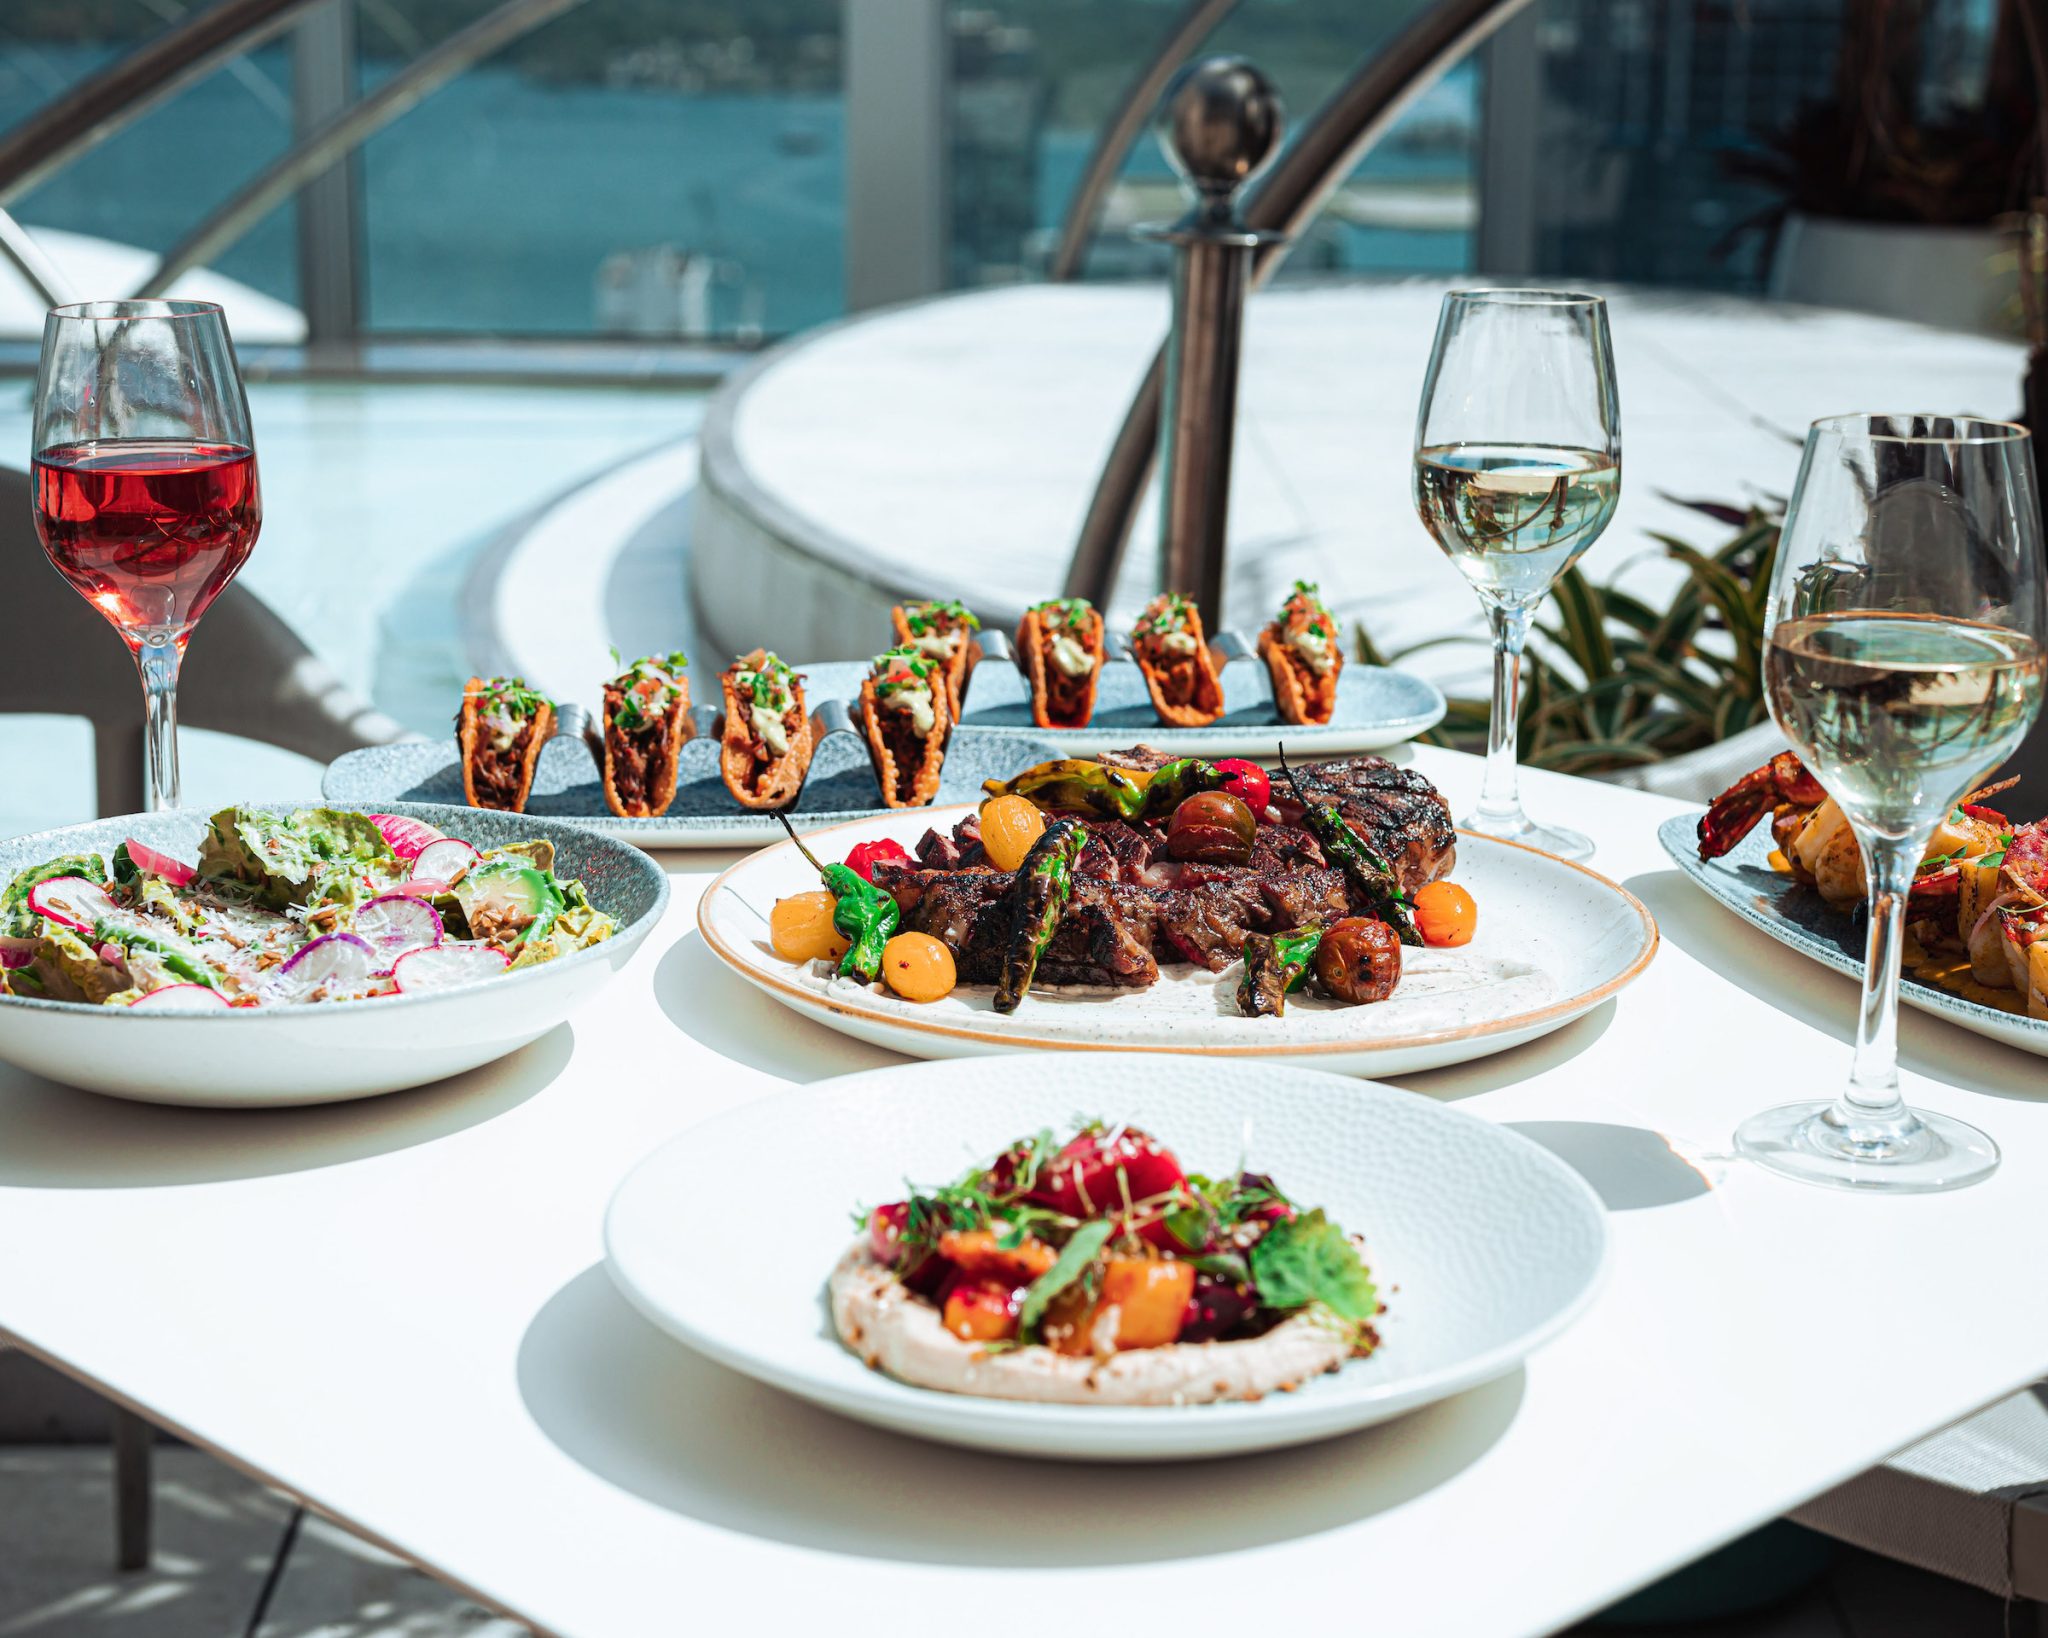 KŌST is a 44th floor rooftop restaurant and bar from hospitality leader ICONINK, featuring unparalleled panoramic views of the city from Toronto’s BISHA Hotel.